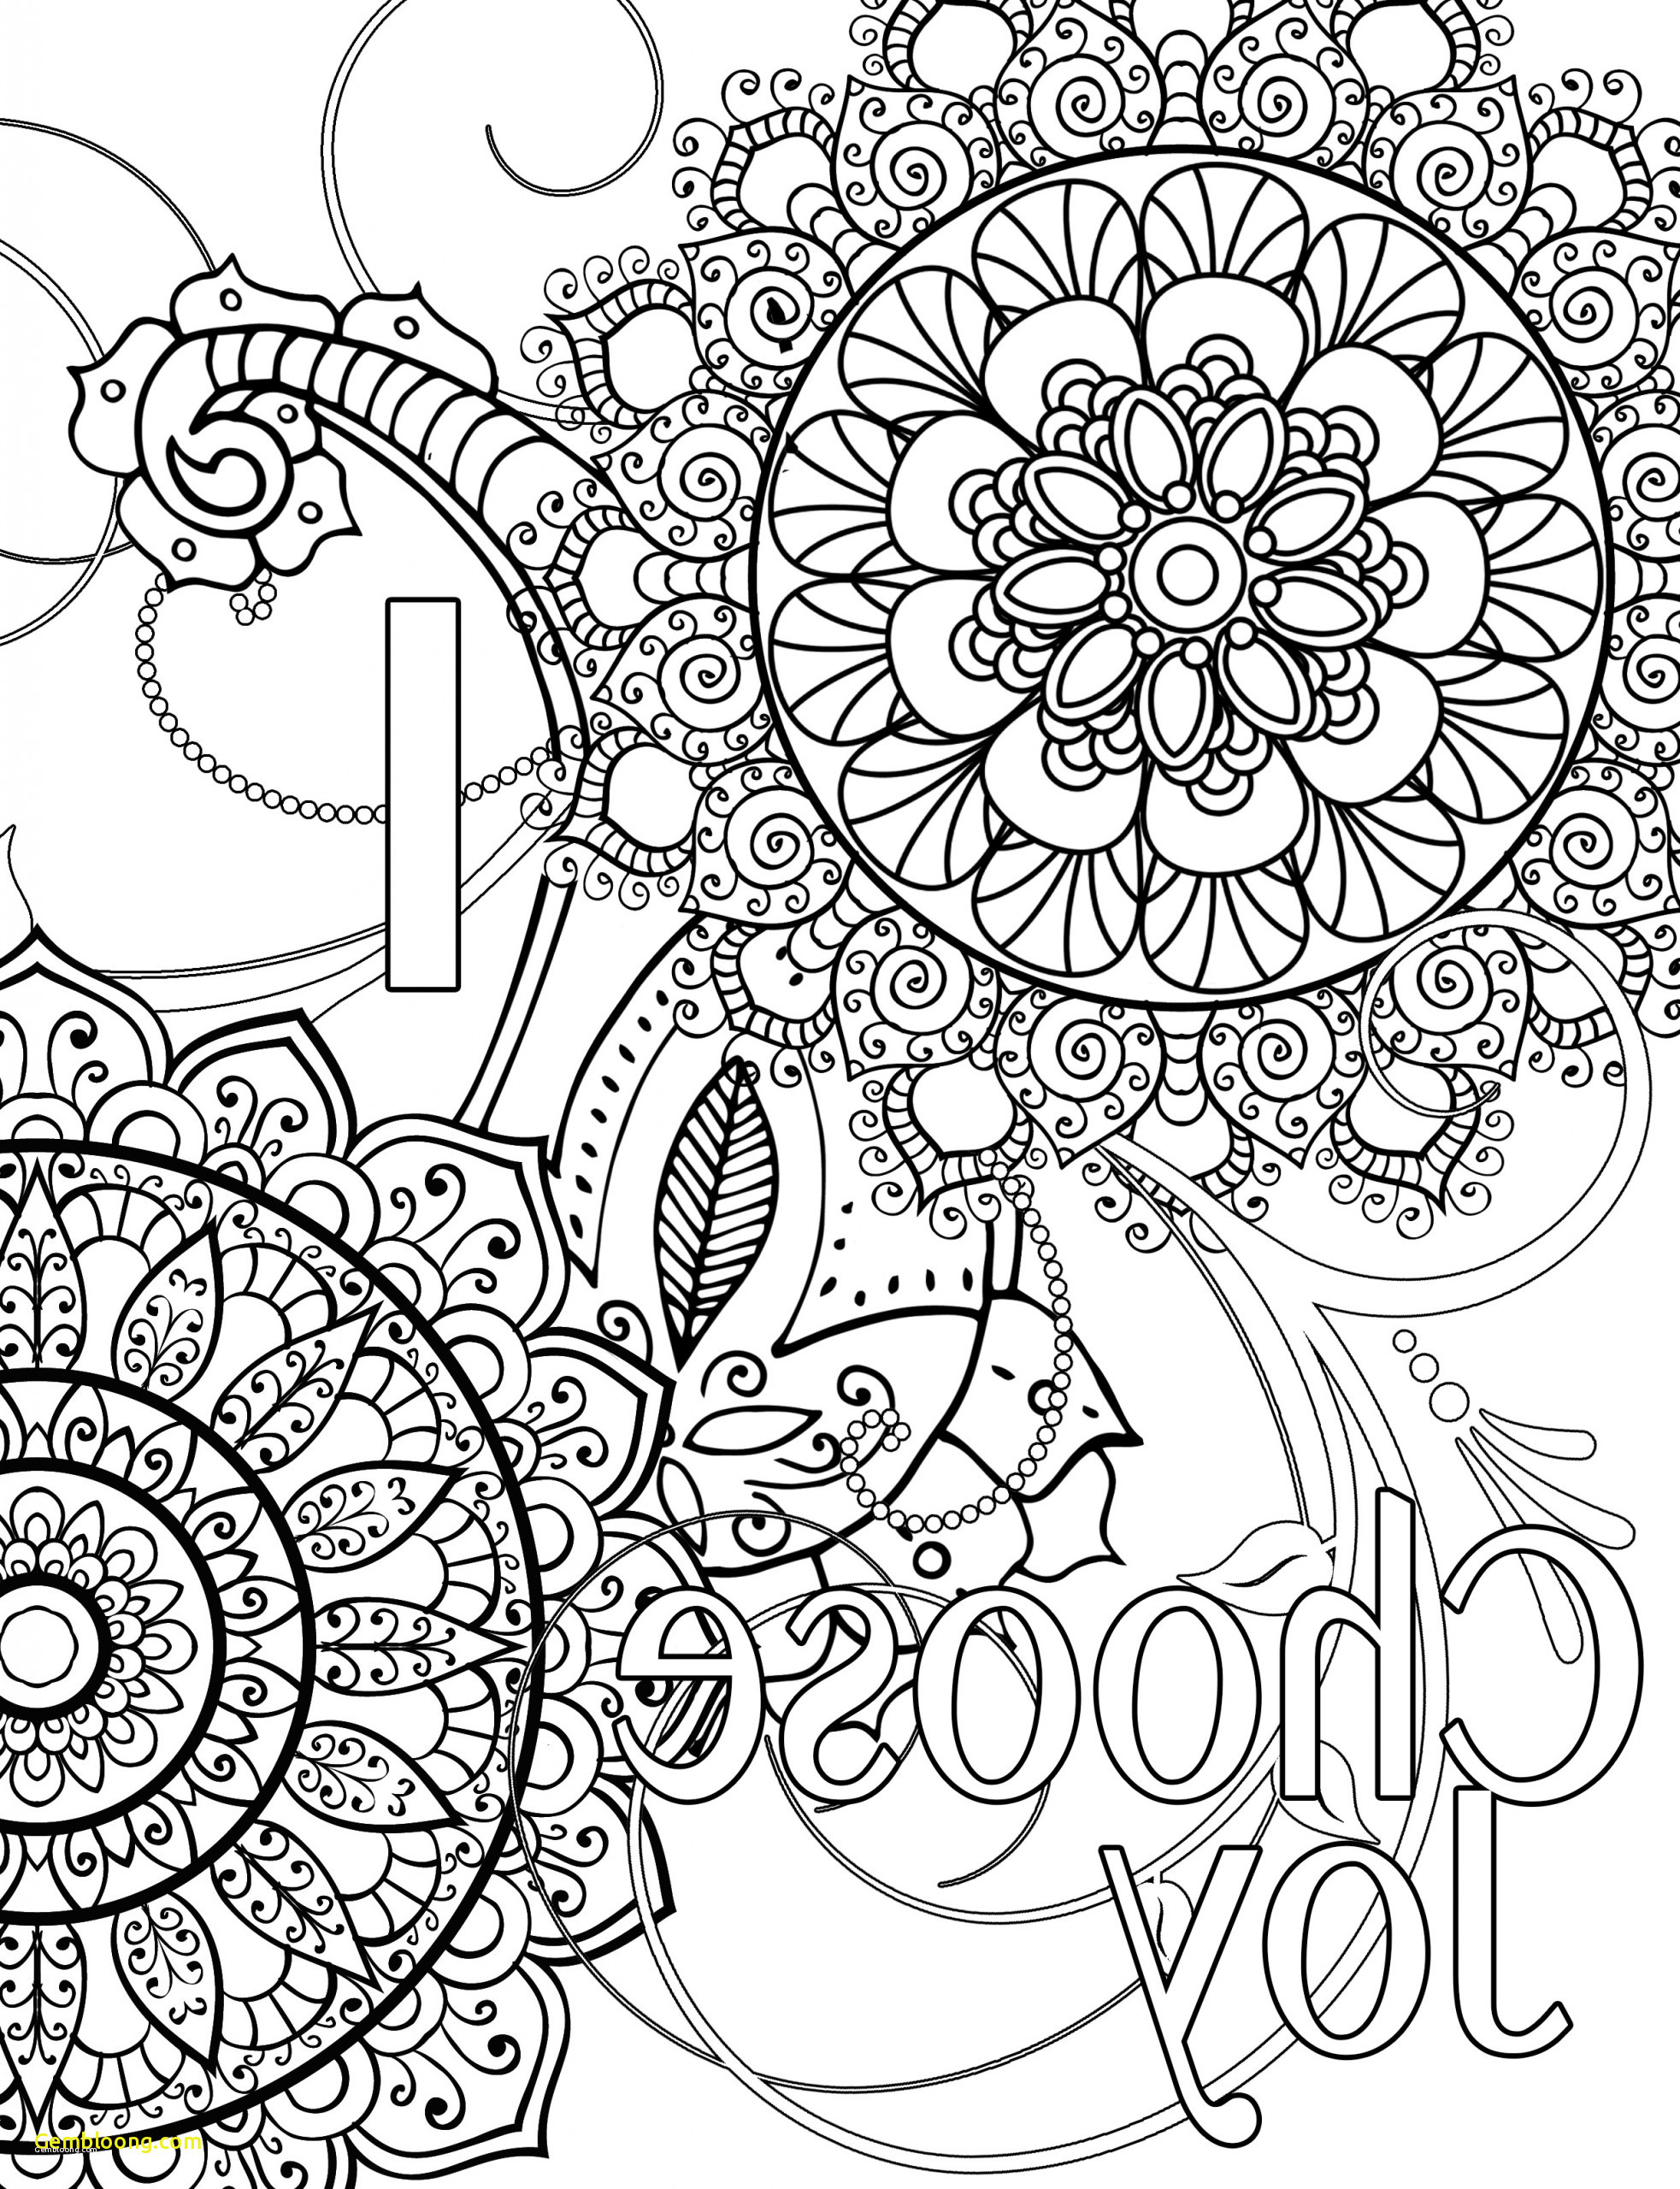 cuss word adult coloring pages